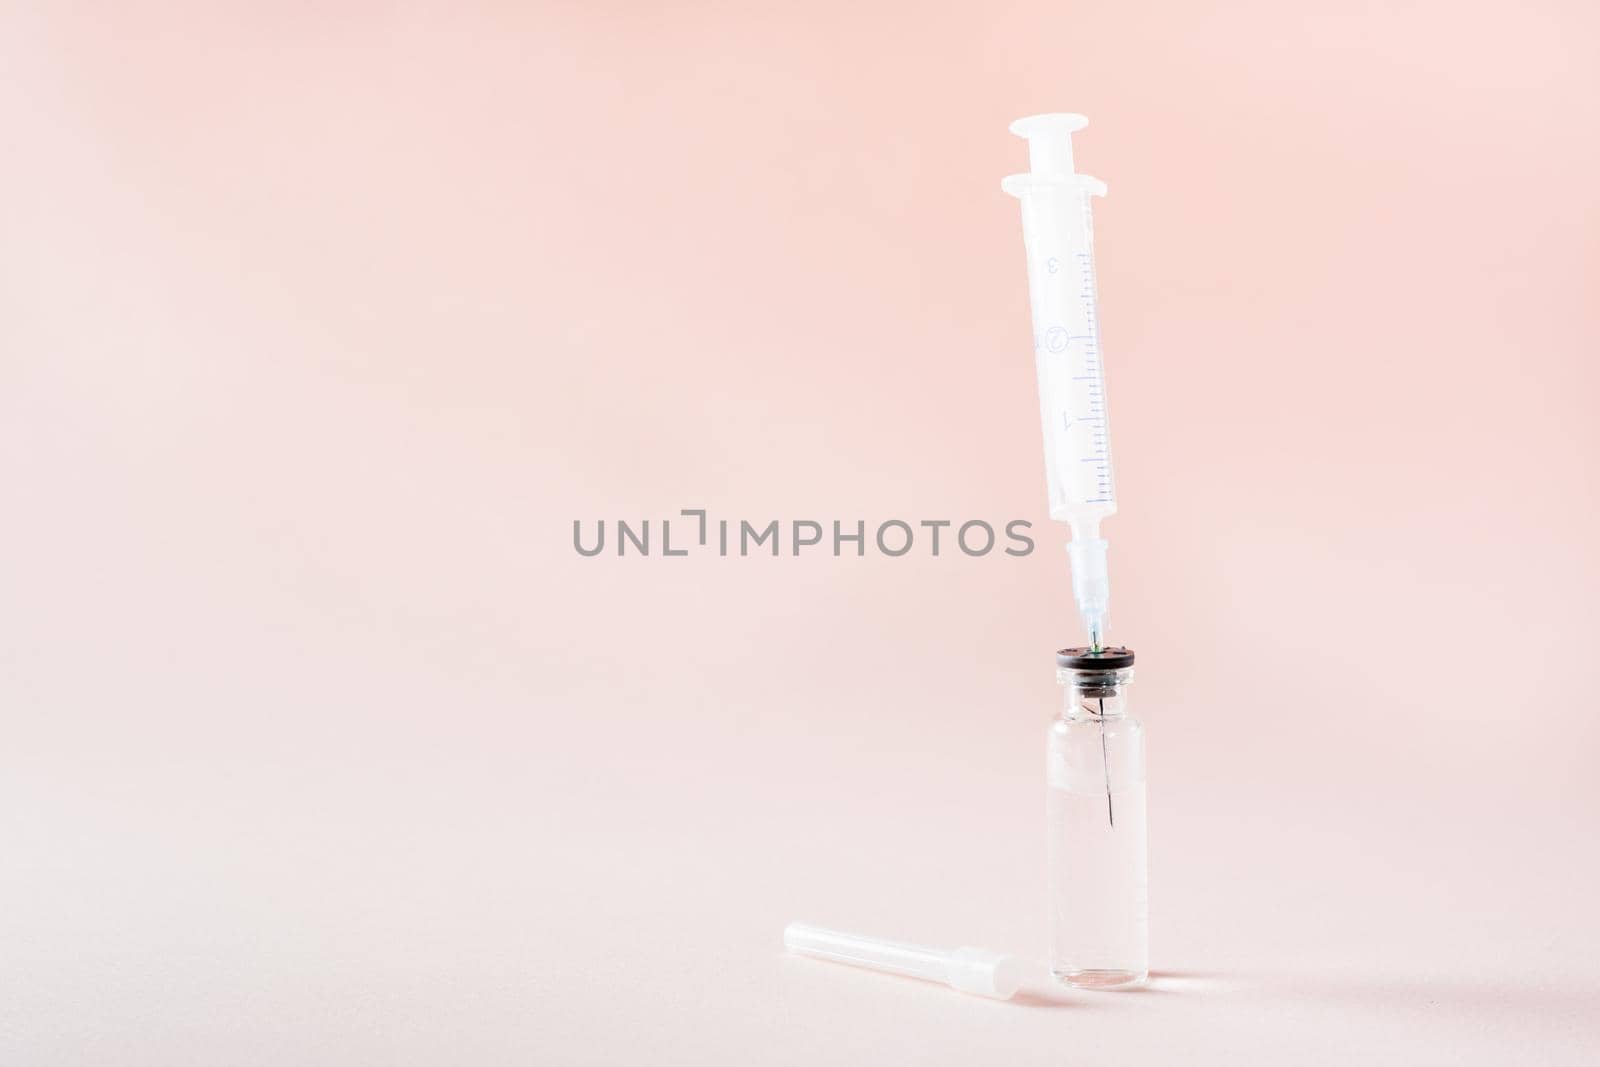 Vaccination and Immunization. Syringe needle inserted into a glass vial with vaccine